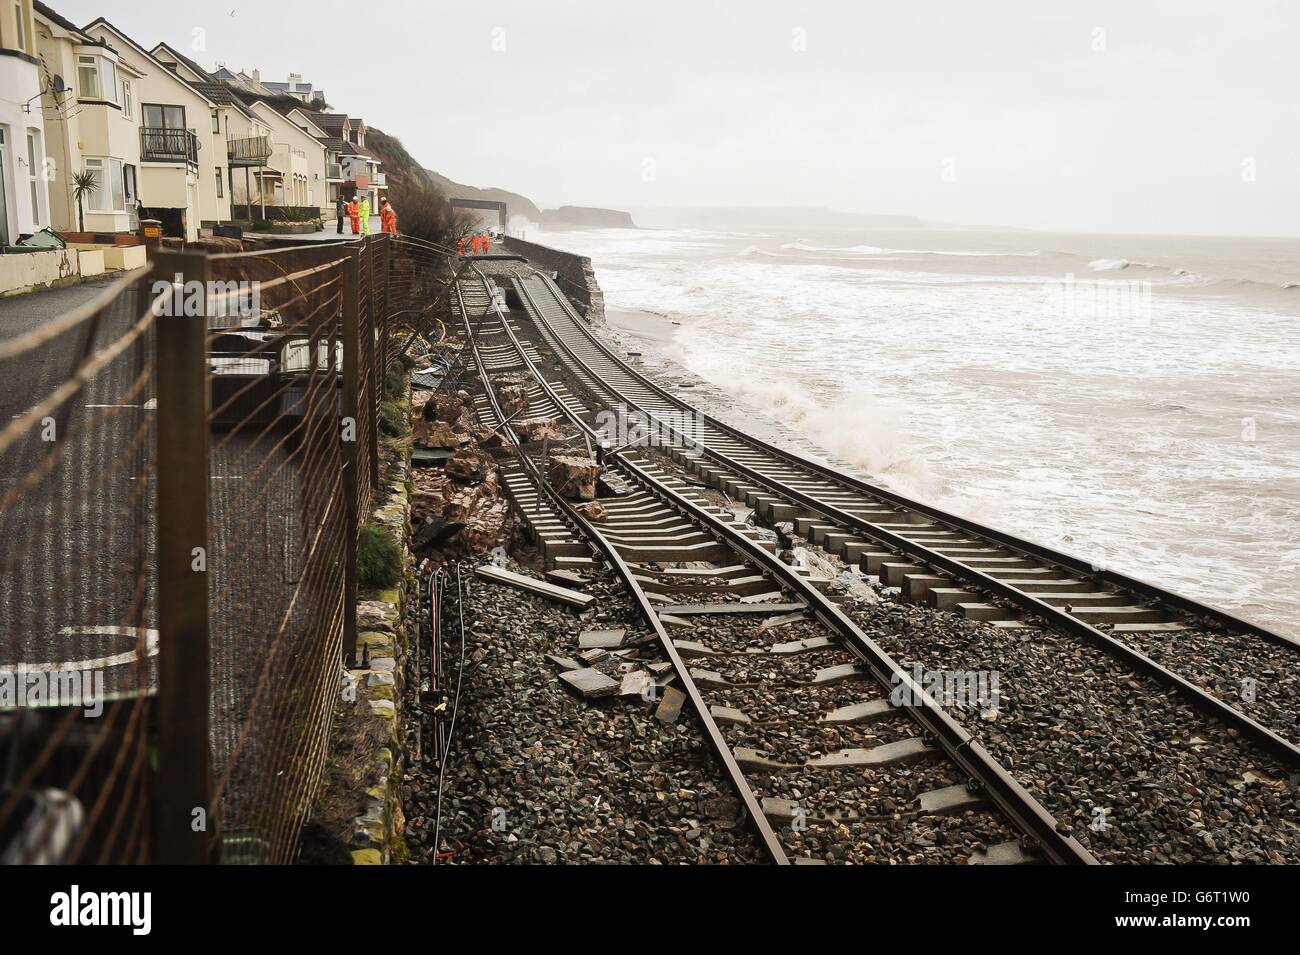 A huge length of railway track is exposed and left hanging after the sea wall collapsed in Dawlish, where high tides and strong winds have created havoc in the Devonshire town disrupting road and rail networks and damaging property. Stock Photo